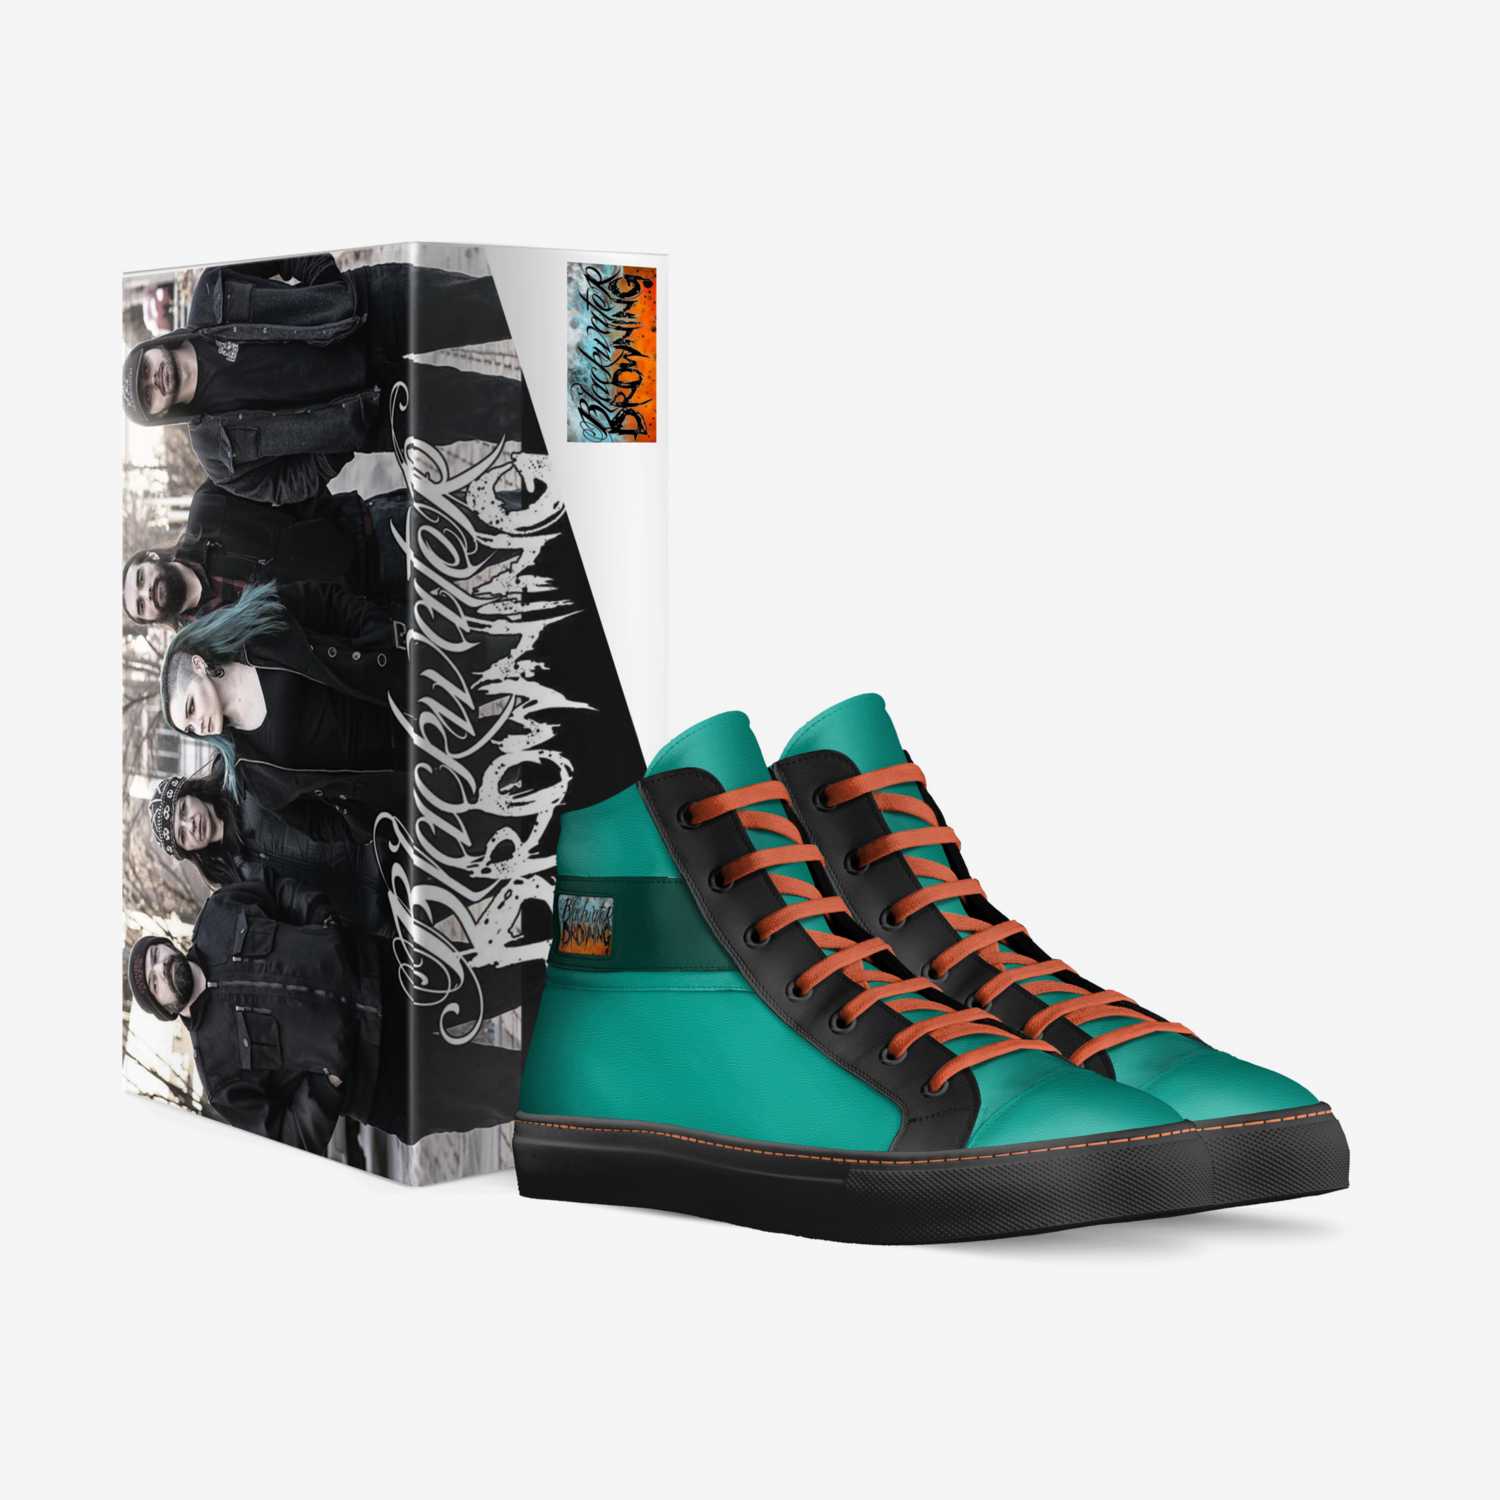 BlackWaterDrowning custom made in Italy shoes by David Taylor | Box view